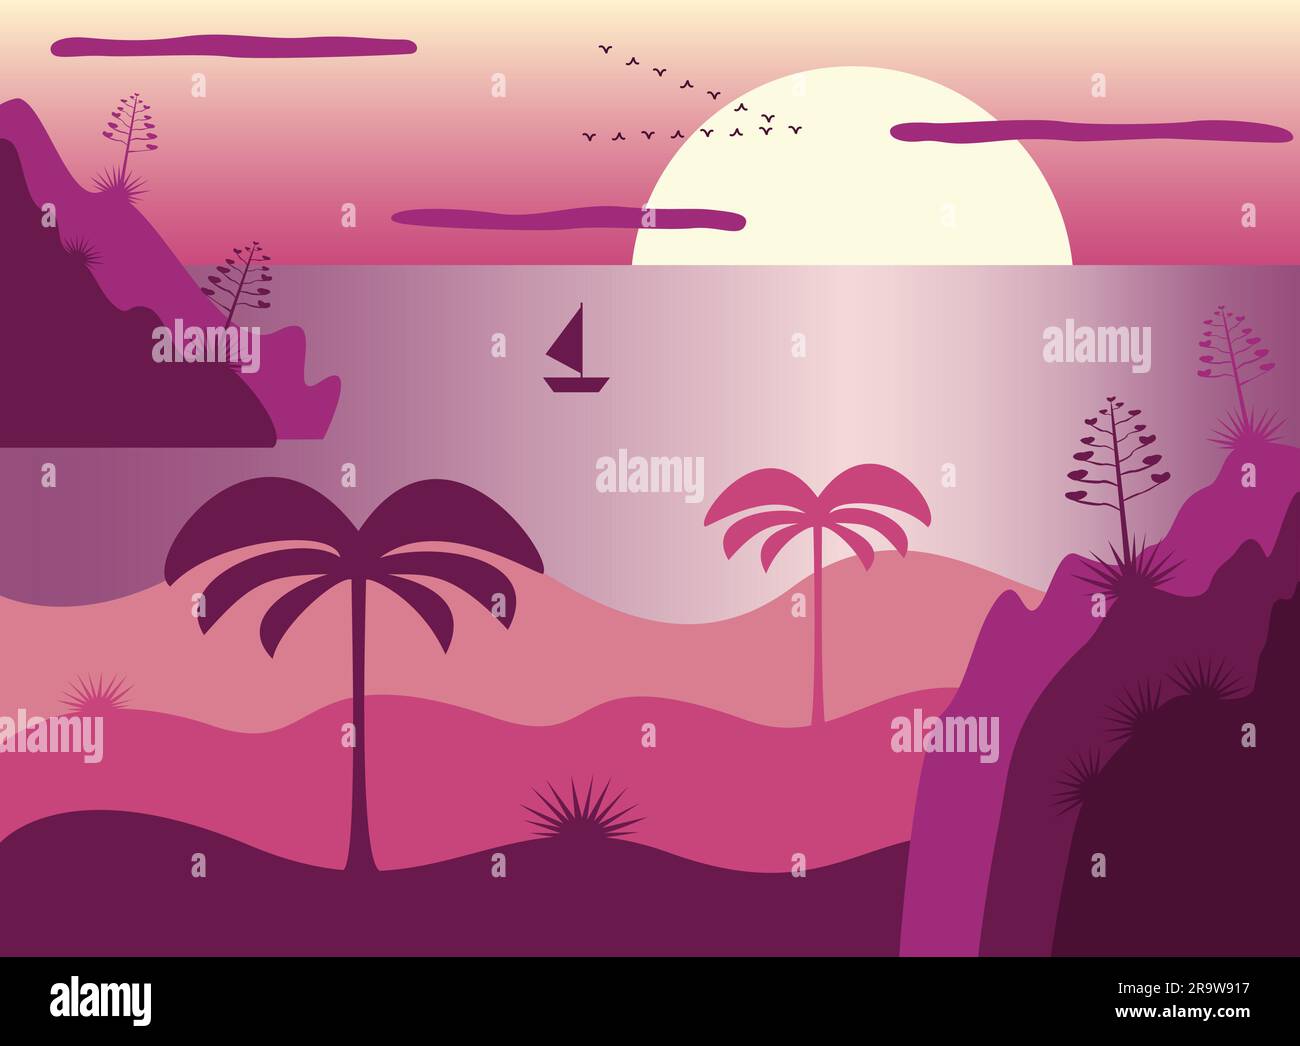 Sea, palm trees, sky and sun in a flat style. Rocks, agaves, a boat and birds flying on the horizon. The pink and violet colors of sunset. Stock Vector